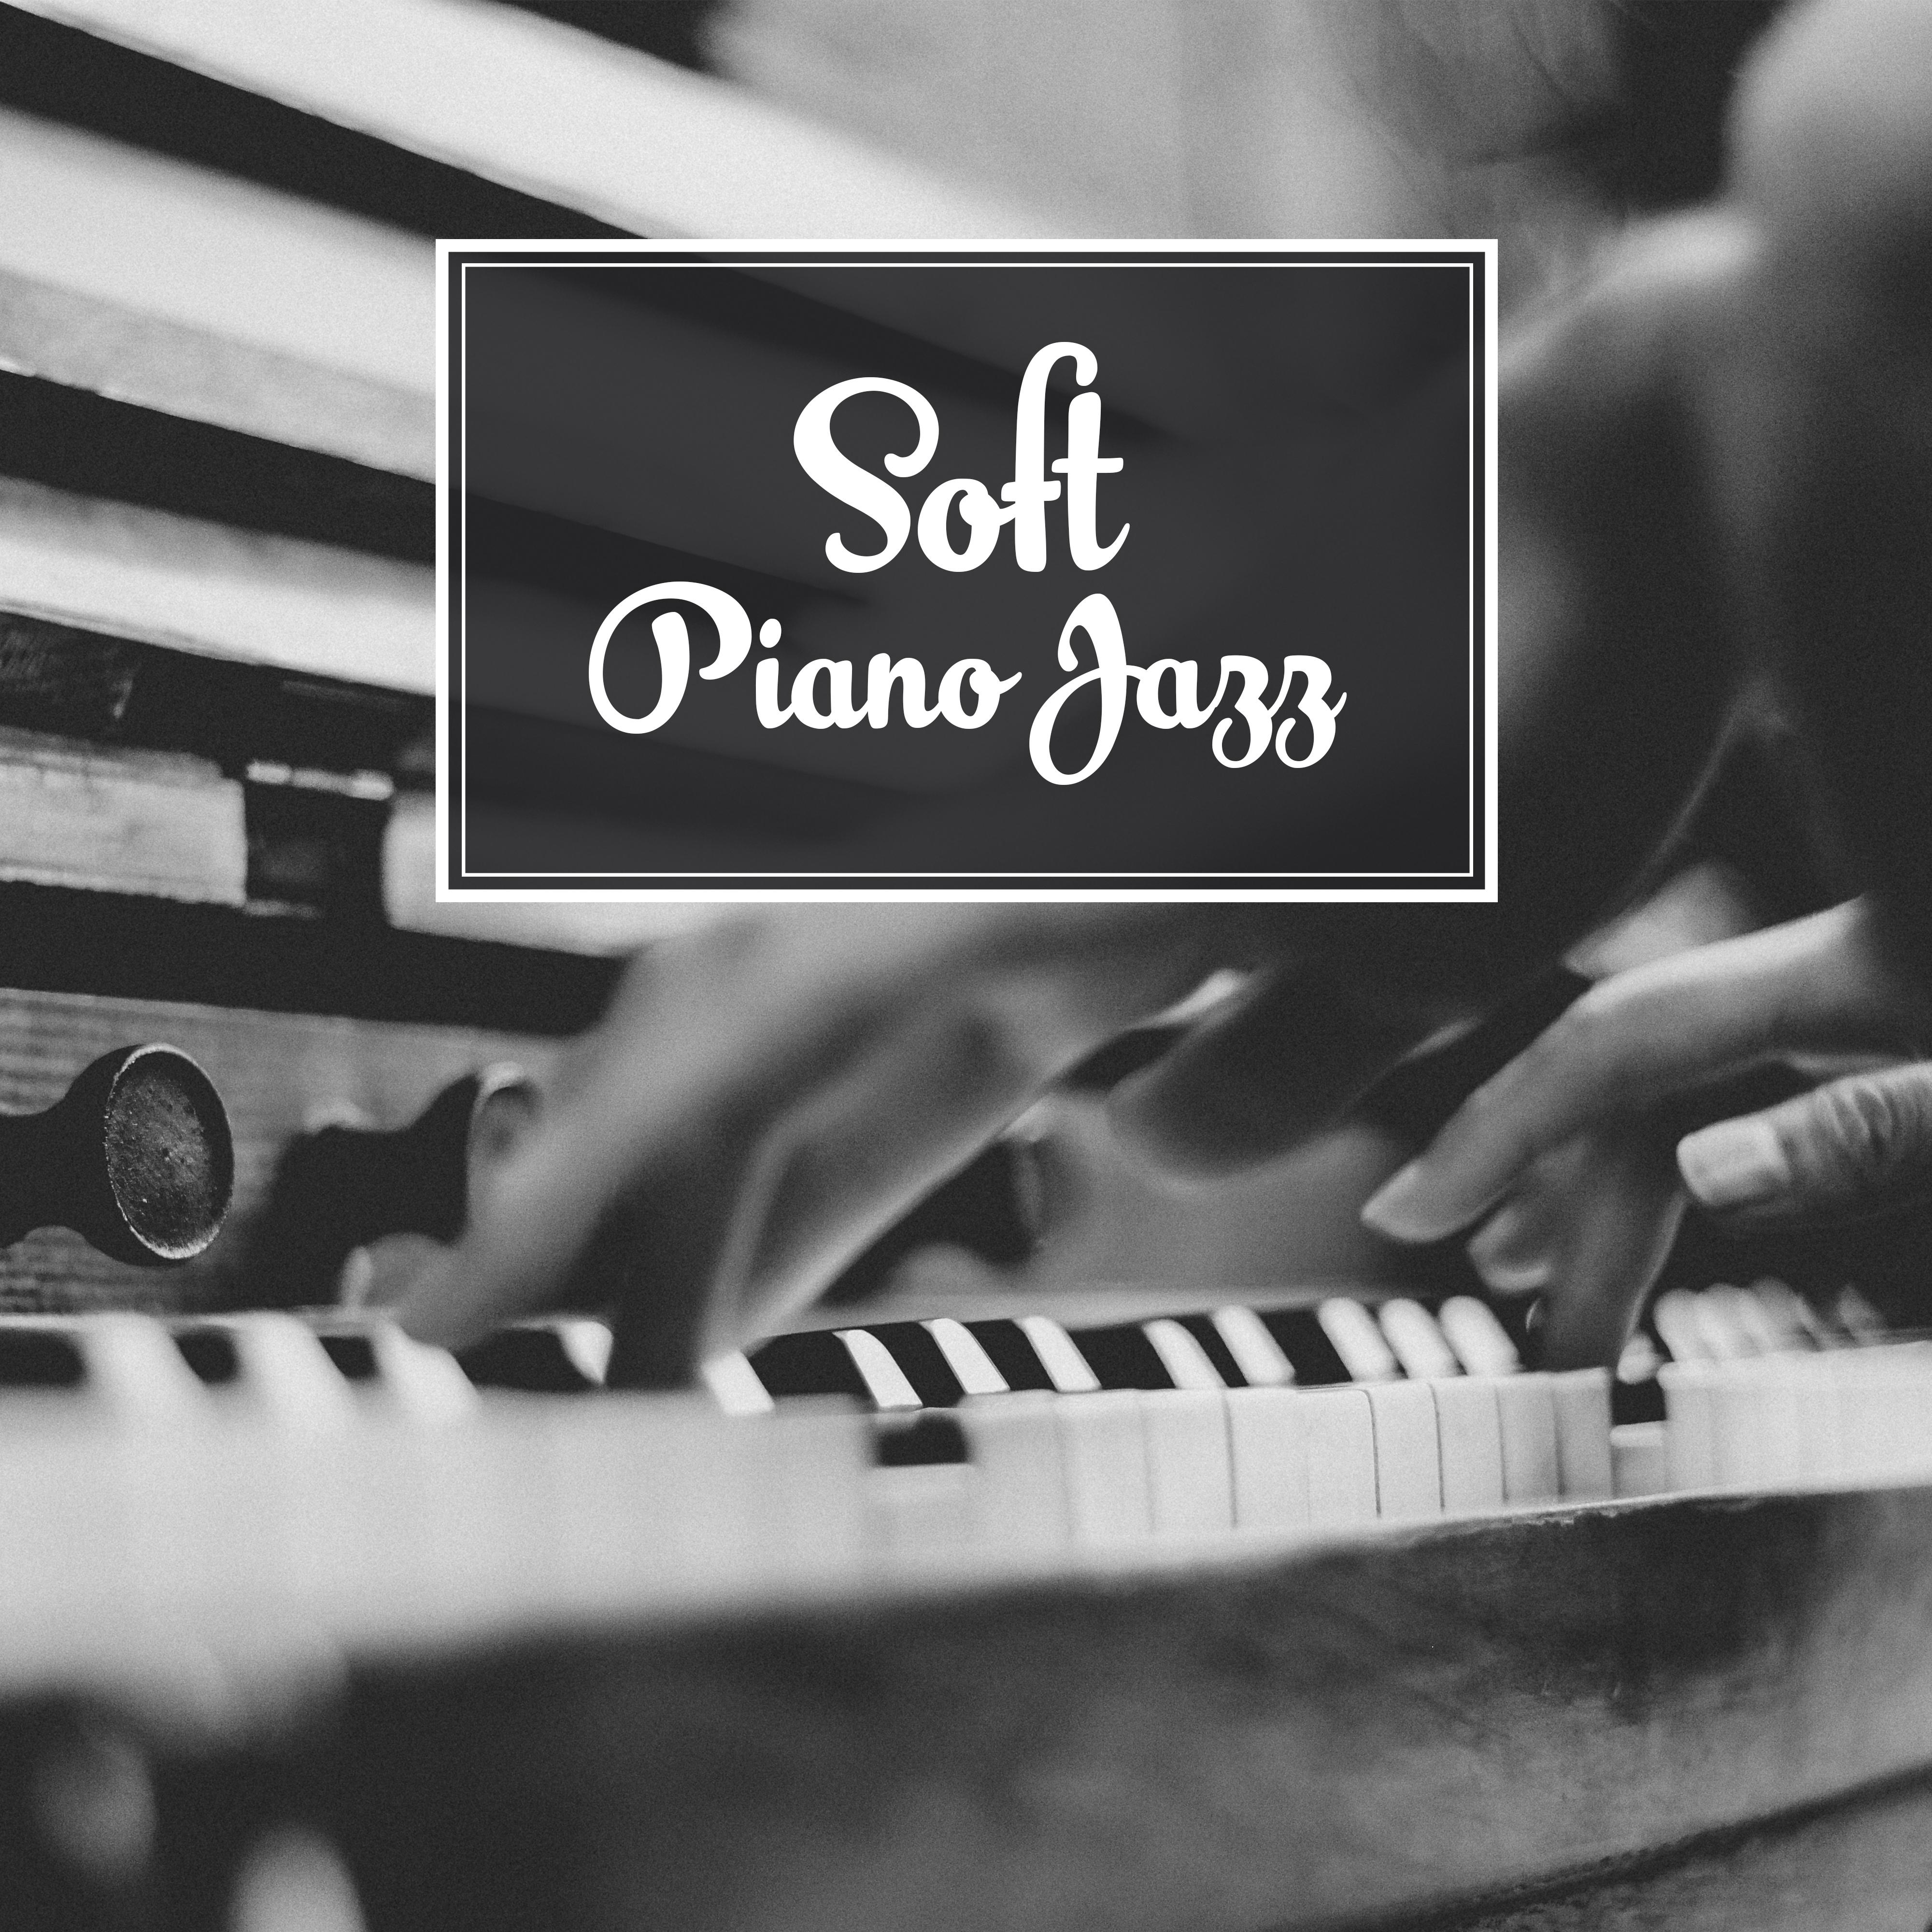 Soft Piano Jazz  Relaxing Melodies, Piano Bar, Sensual Note, Moonlight Jazz, Smooth Sounds to Rest